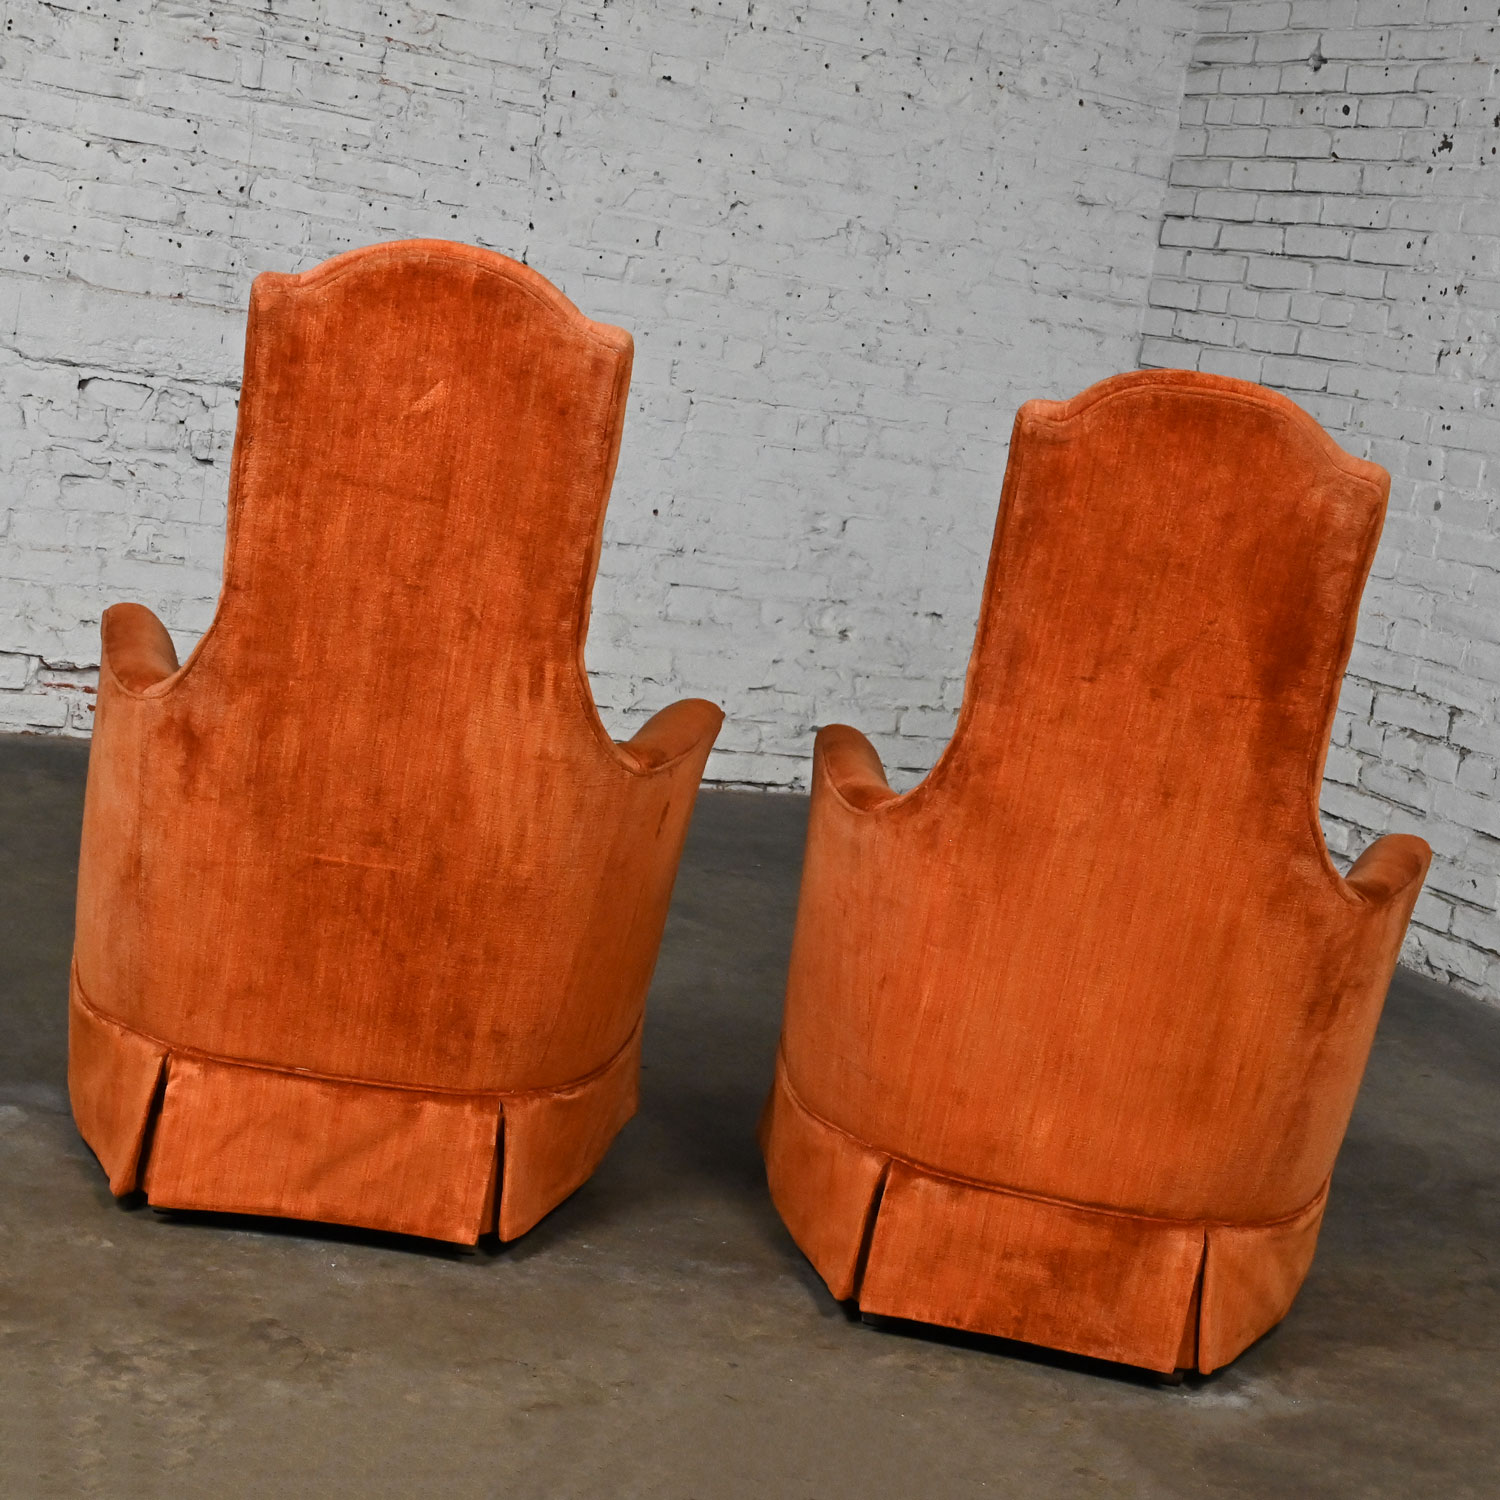 1960-1970’s Hollywood Regency Lounge or Club High Back Chairs by Perfection Furniture with Orange Velvet Fabric a Pair